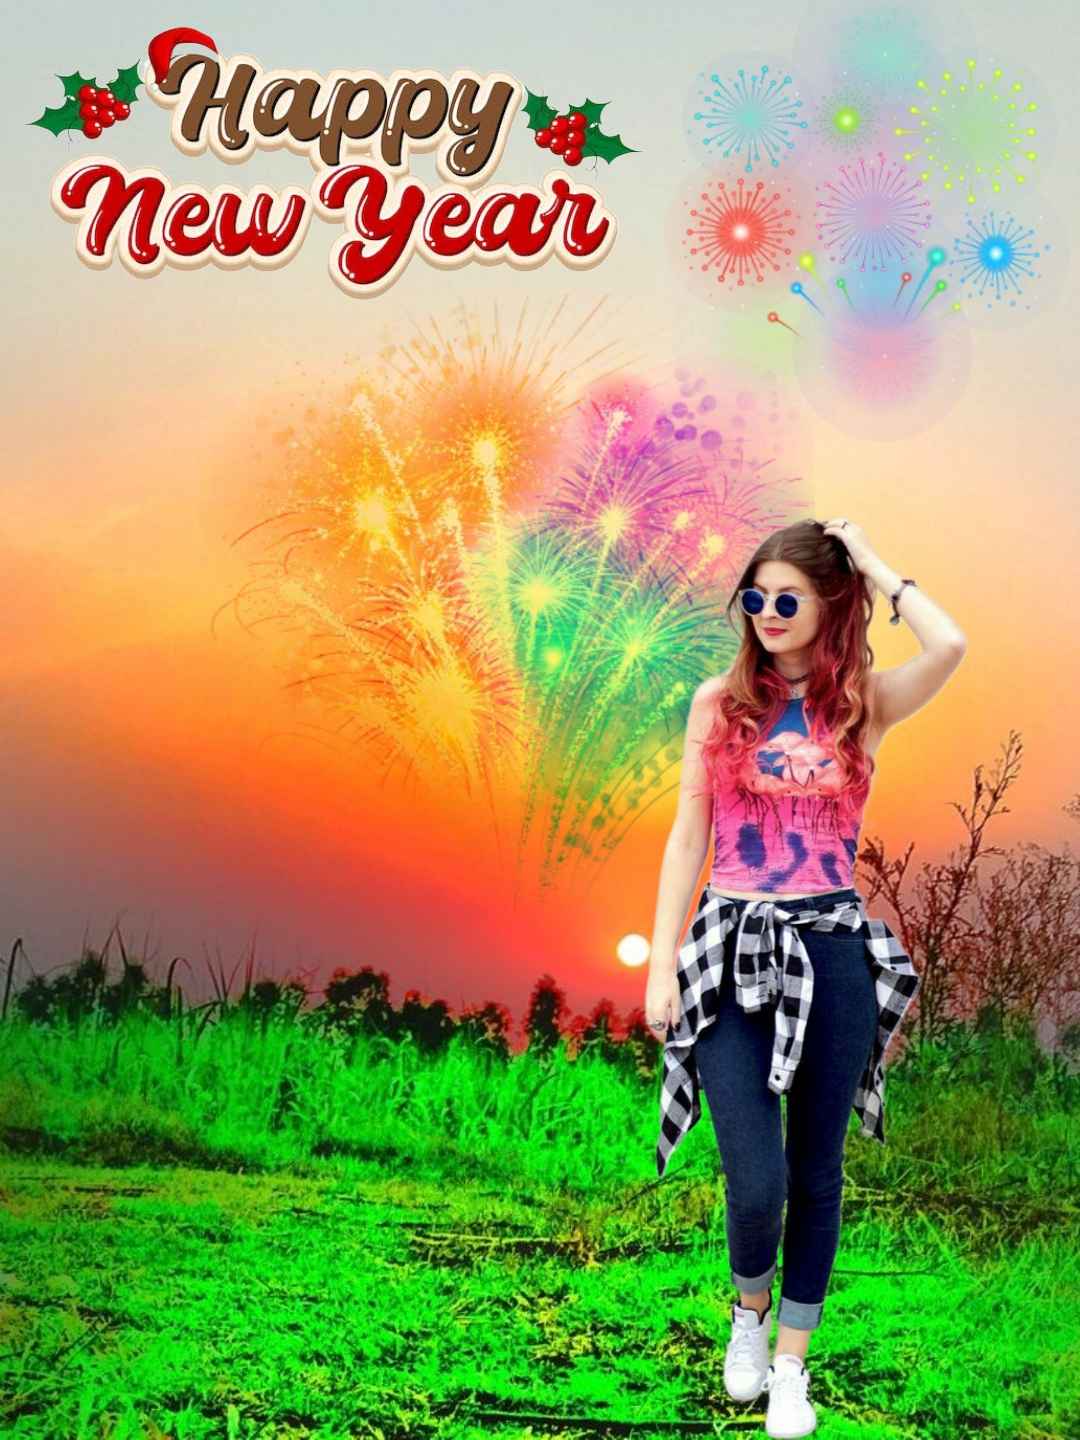 Picsart CB Background Image for New Year